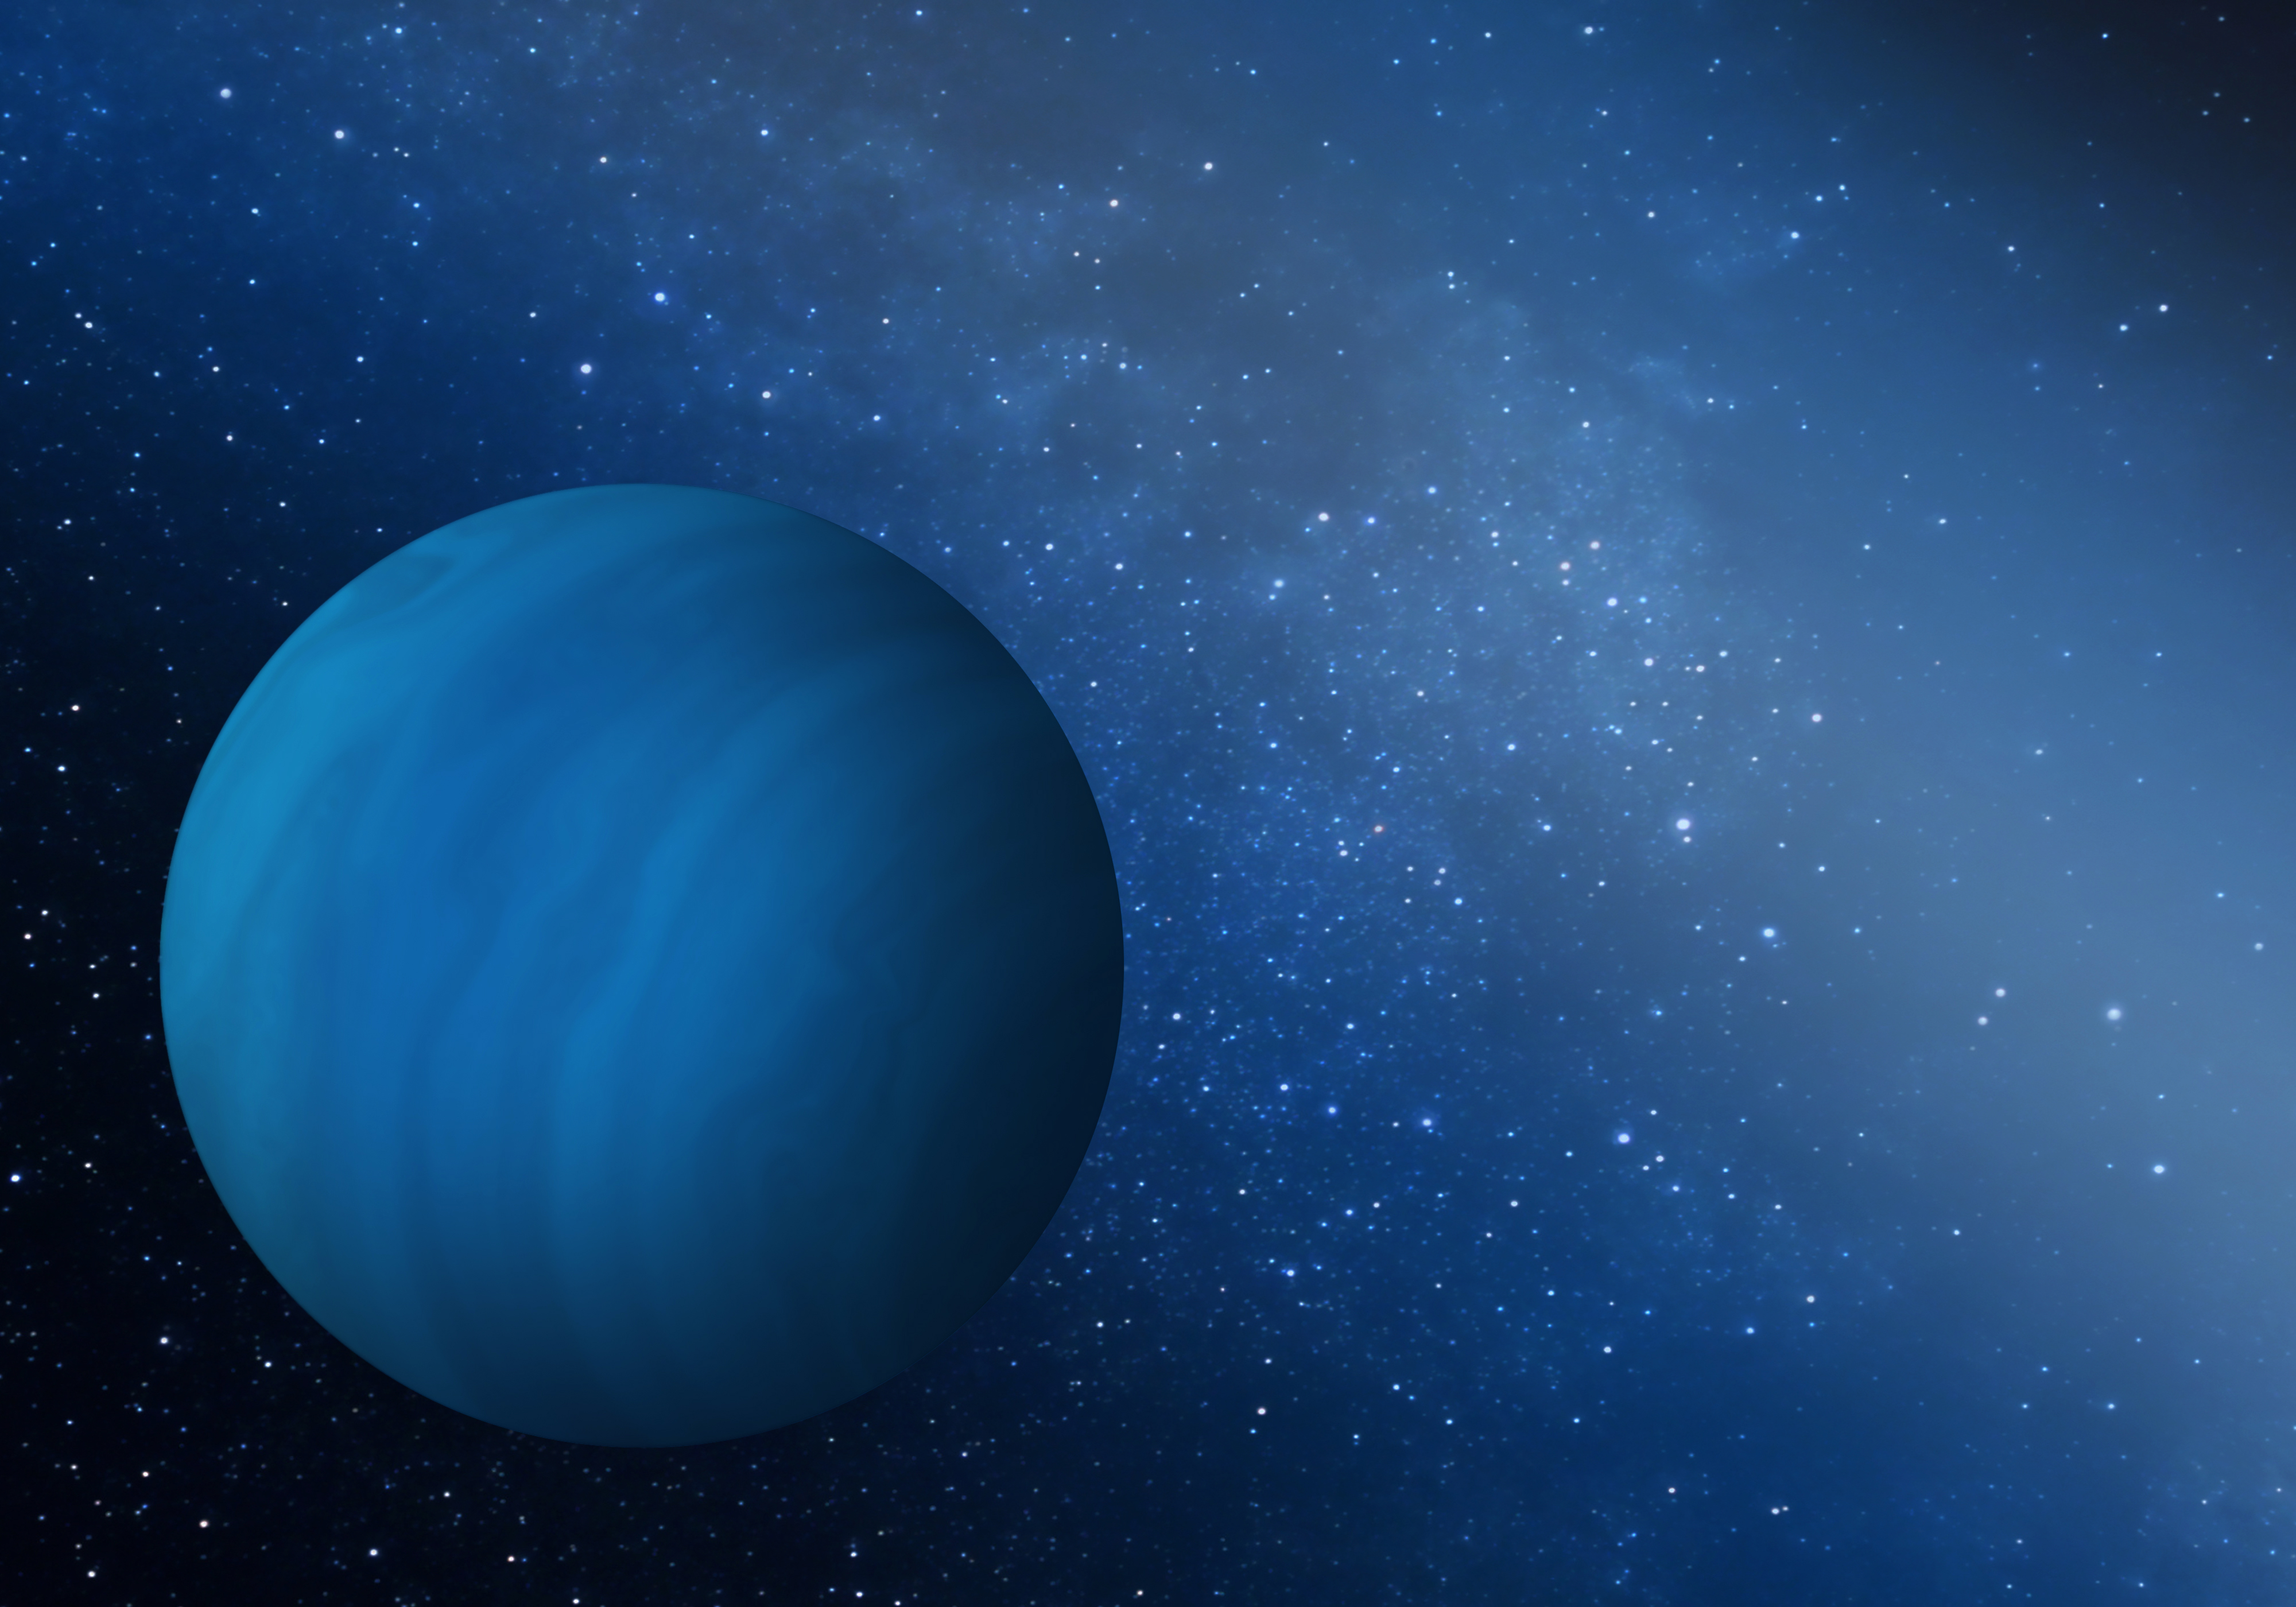 Planet Neptune wallpaper and image, picture, photo